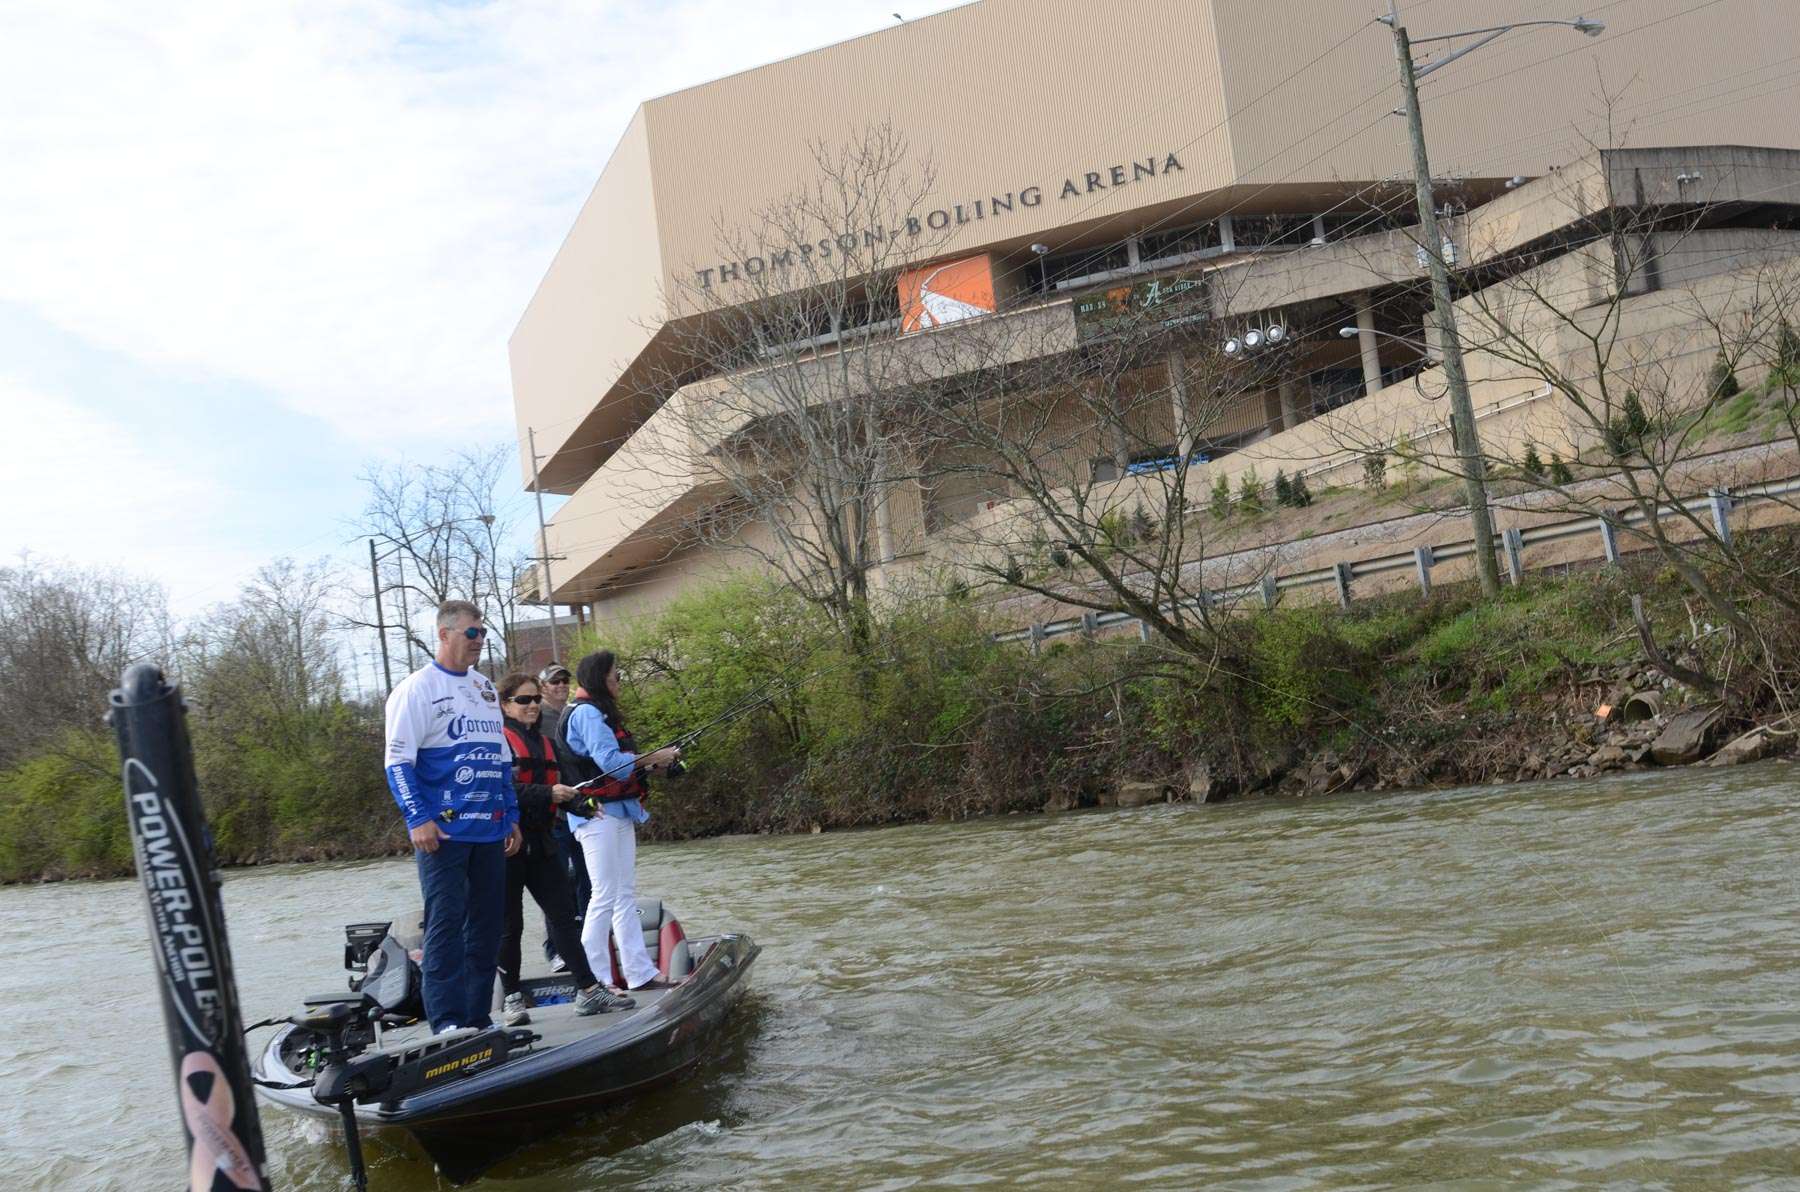 Heavy current moves the group quickly from Neyland Stadium to Thompson-Boling Arena  site of the Bassmaster Classic daily weigh-ins

